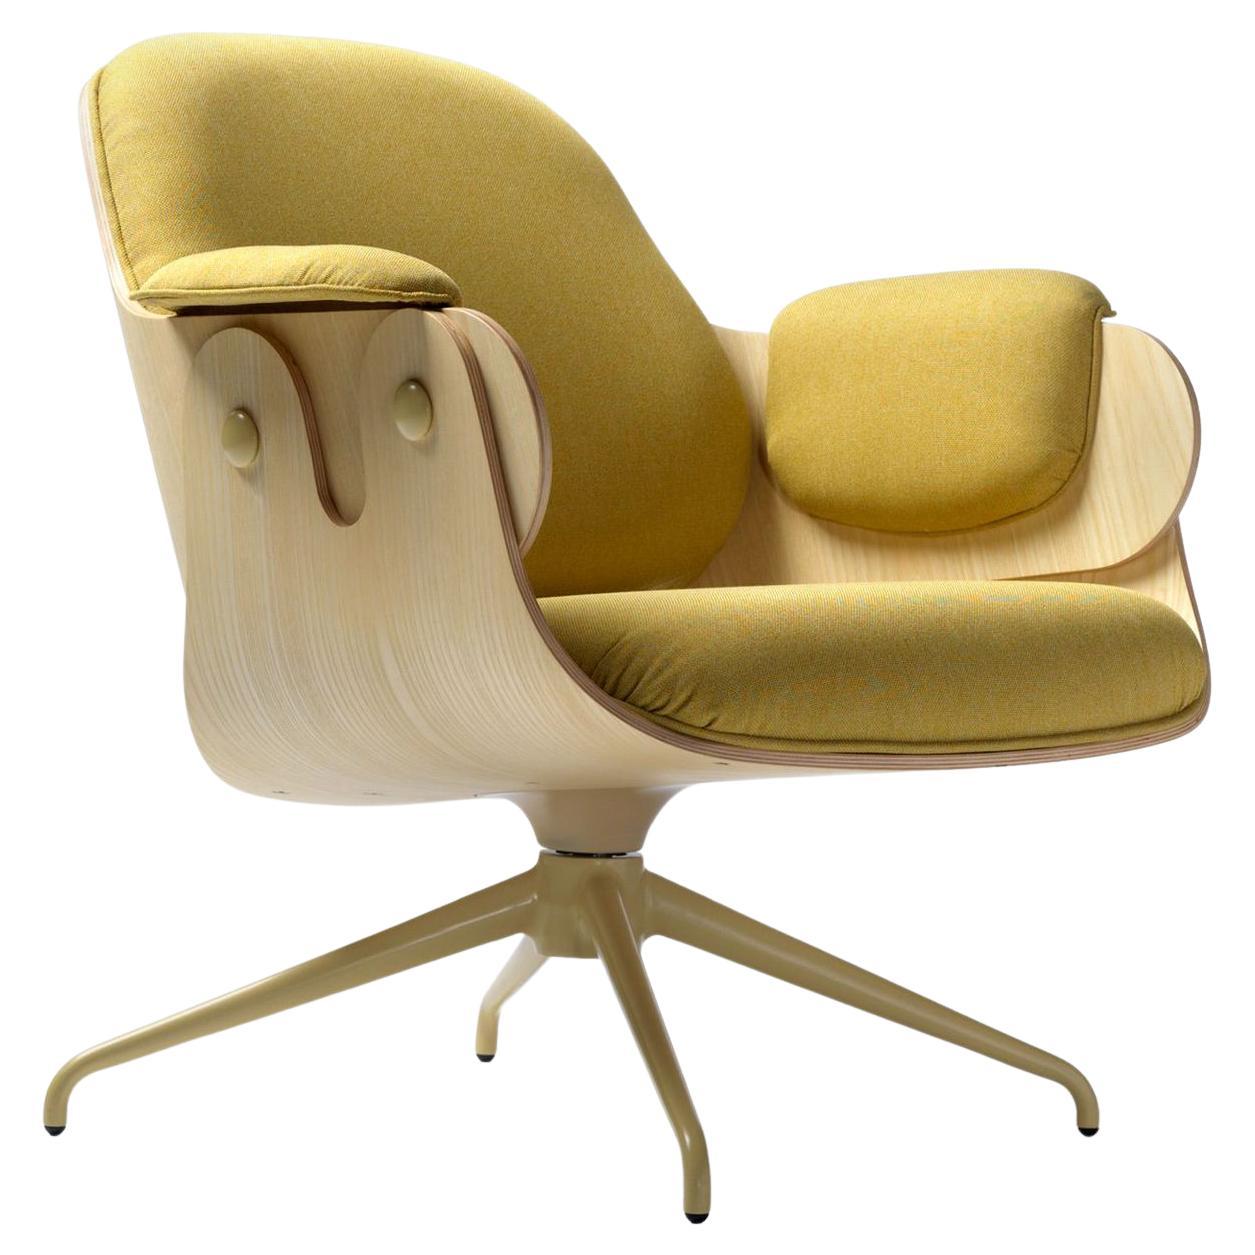 Jaime Hayon, Contemporary, Ash, Yellow Upholstery Low Lounger Armchair For Sale